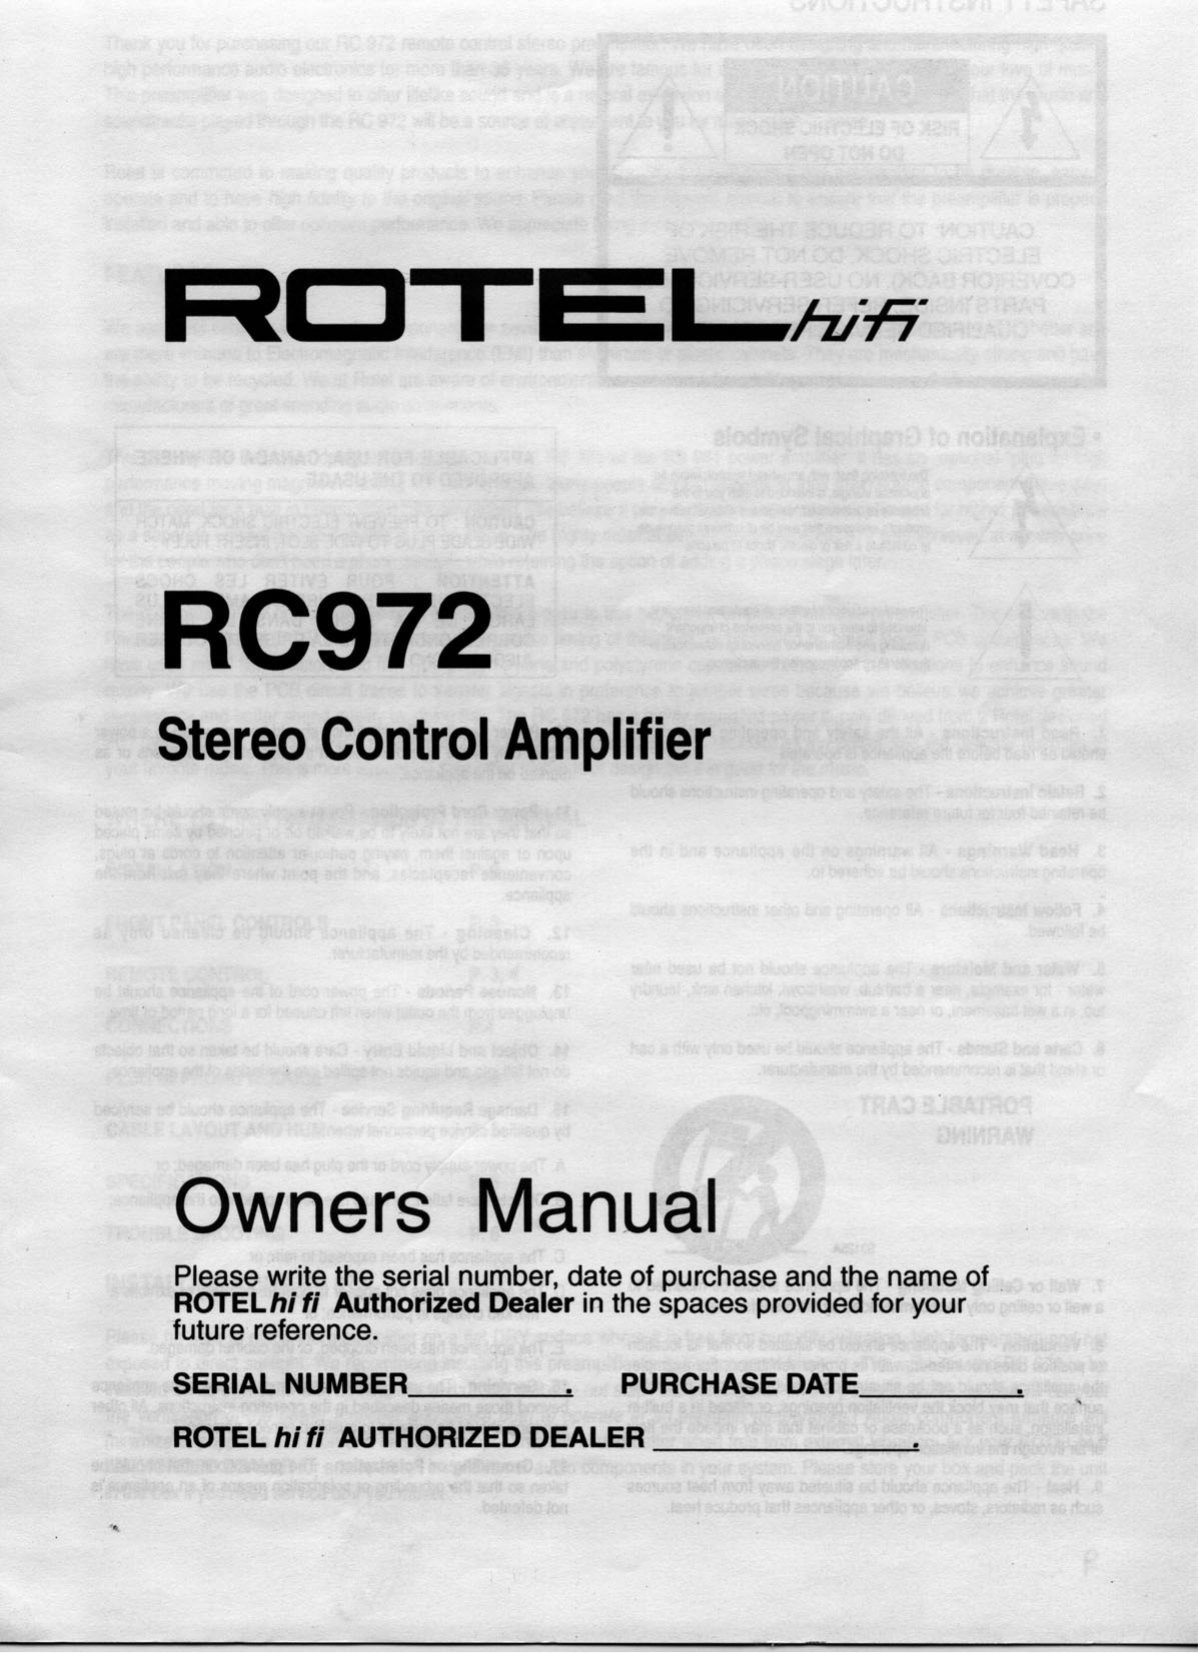 pdf for Rotel CD Player RCD-945AX manual